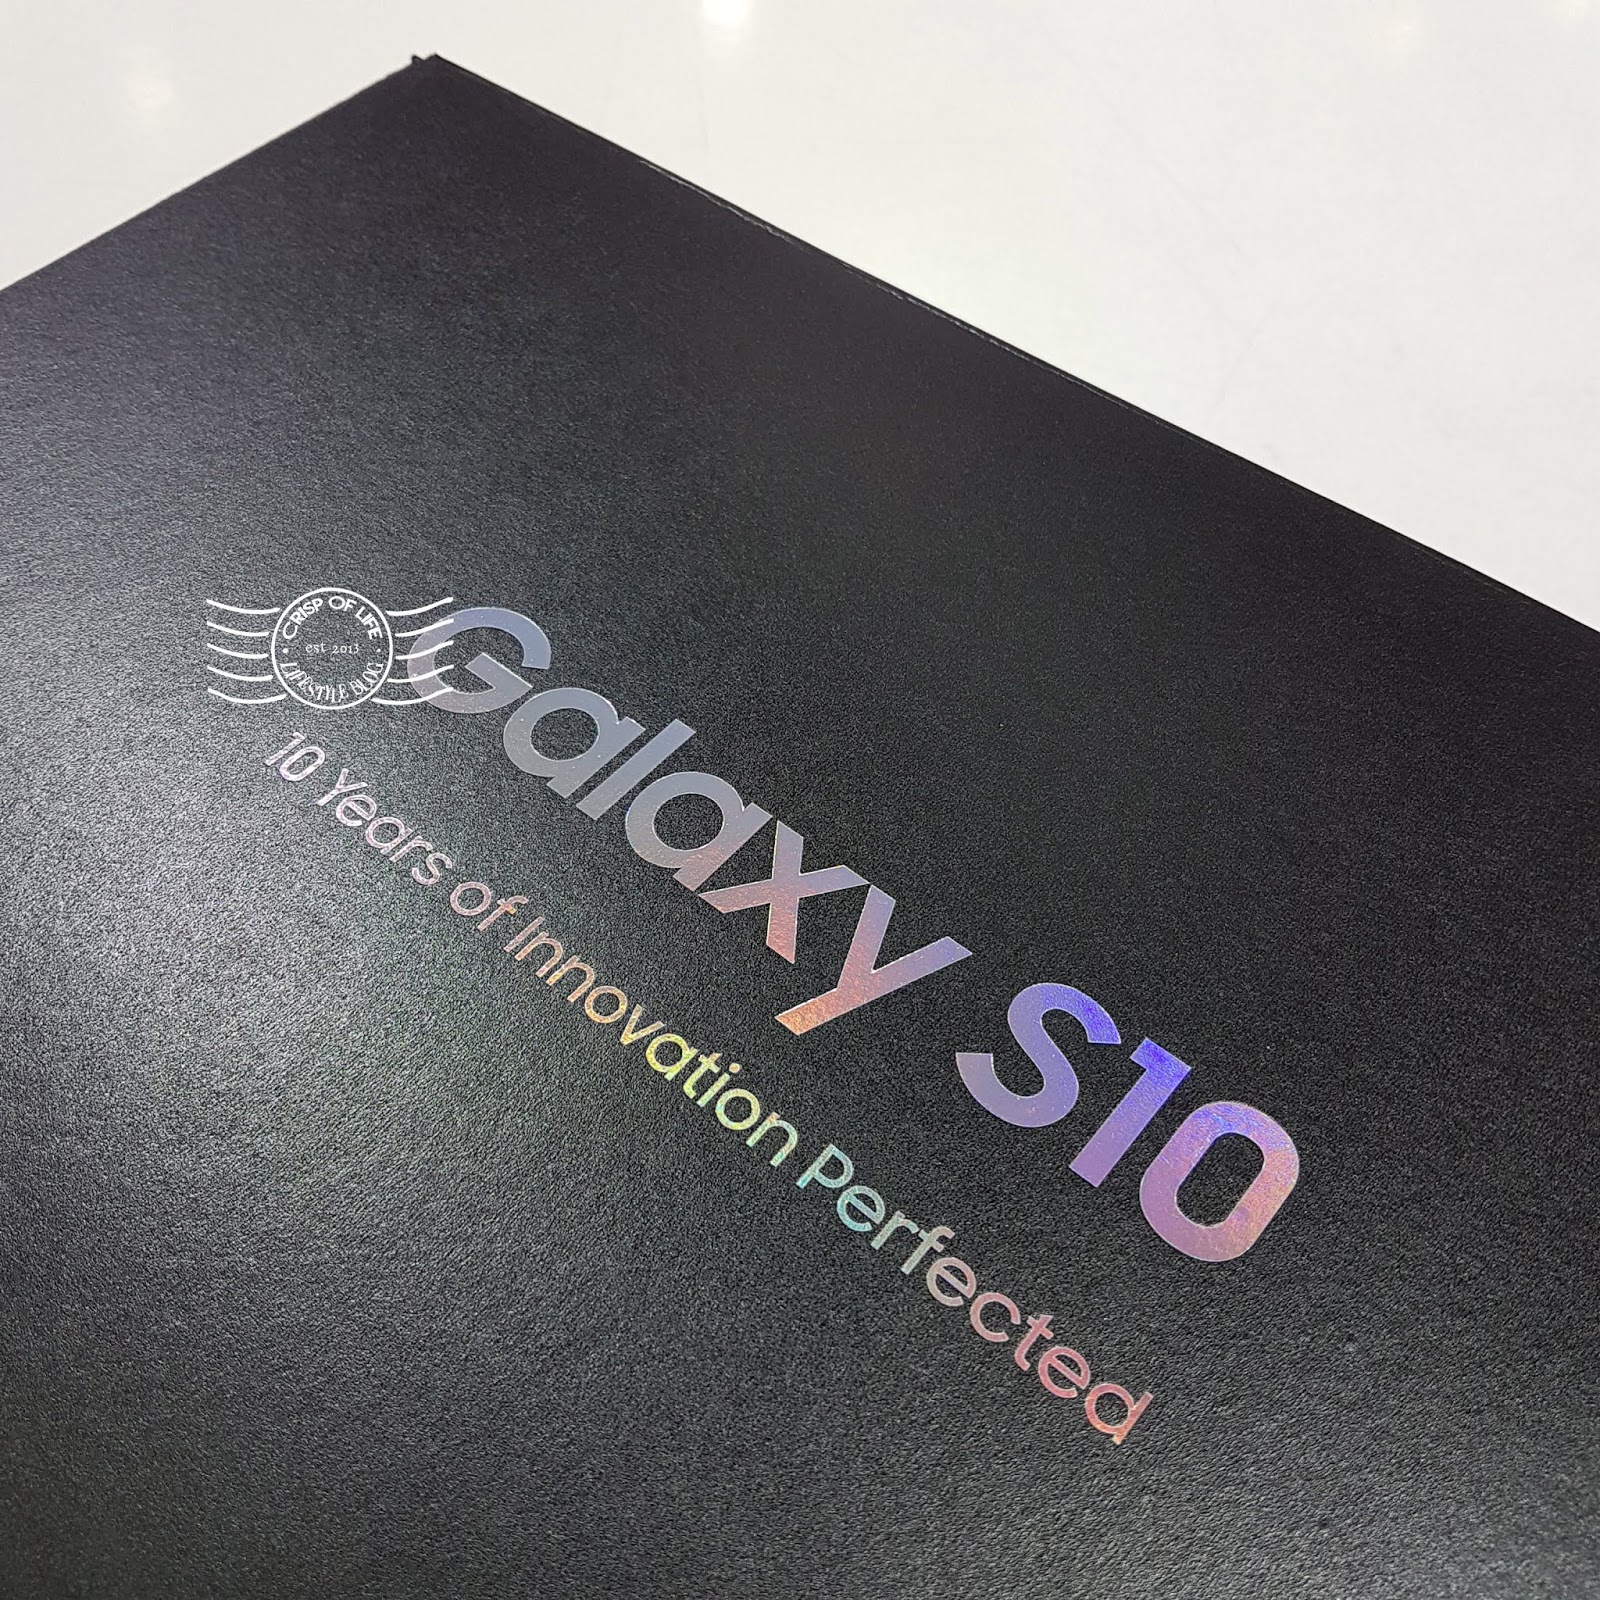 Samsung Galaxy S10+ Hands On User Review